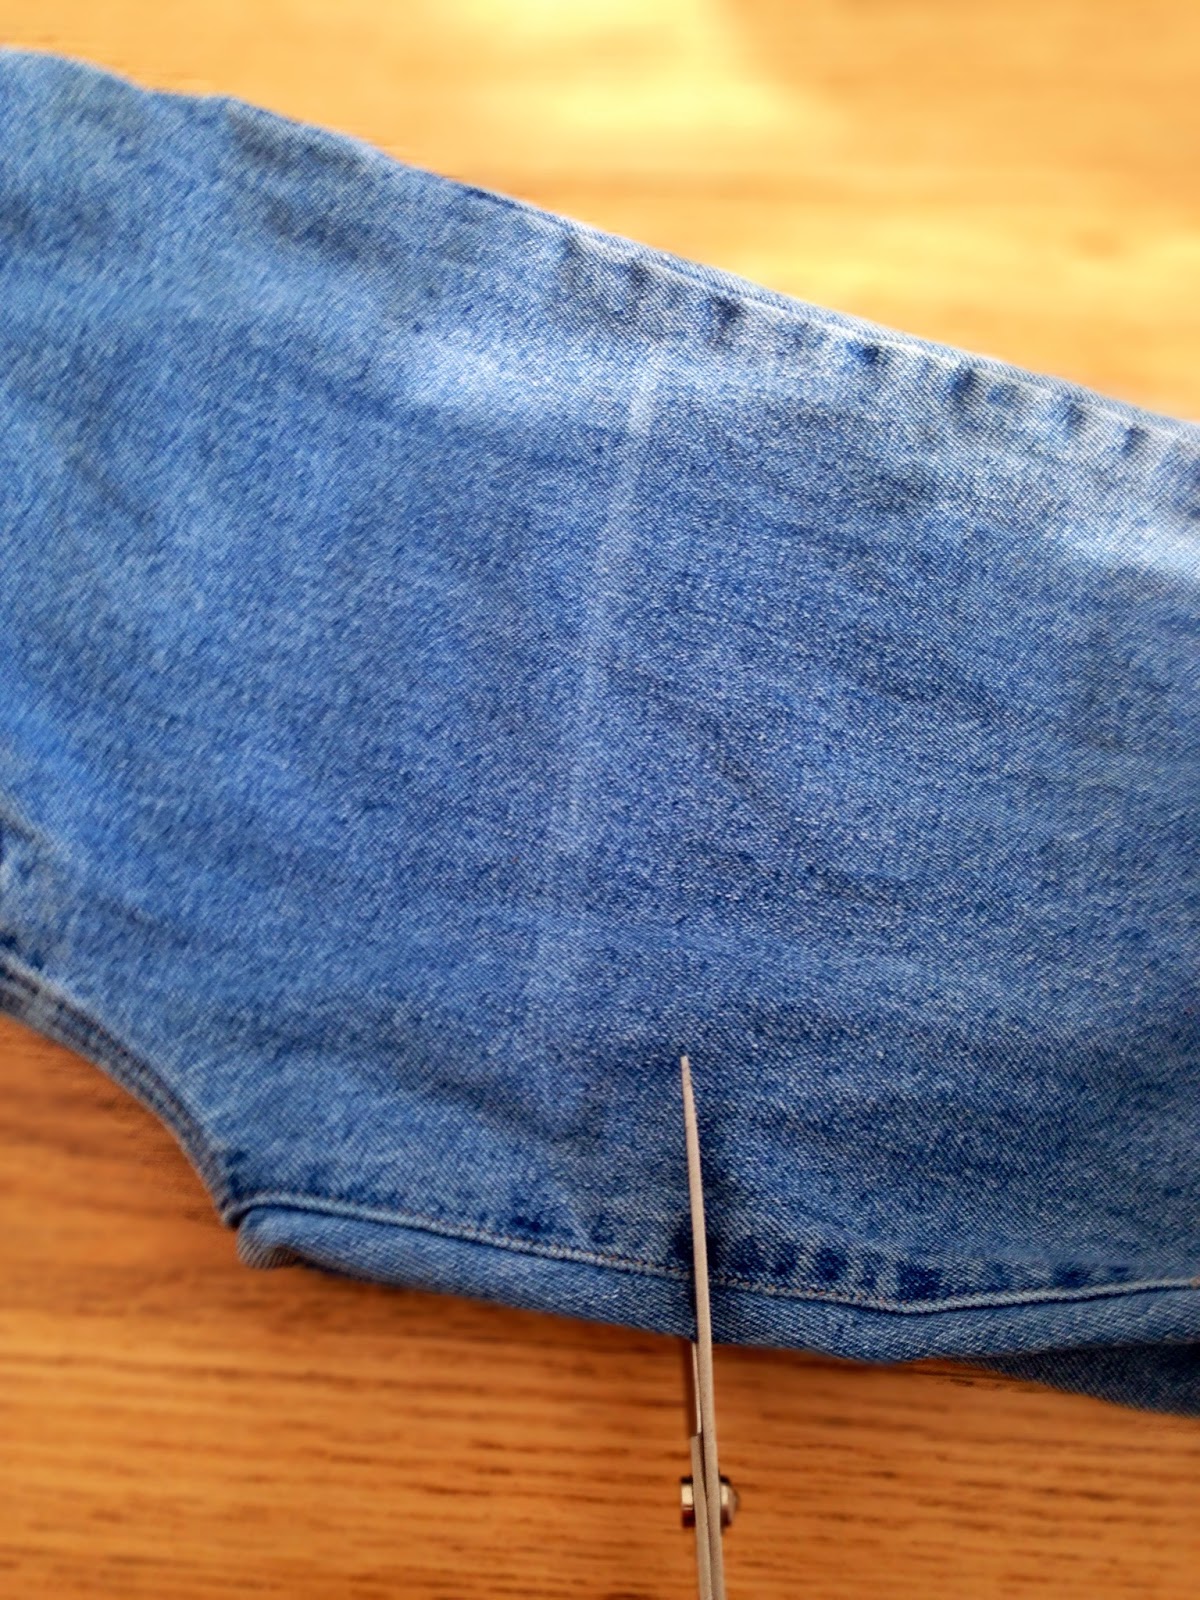 DIY High Waisted Distressed Shorts from Jeans + How to make the waist ...